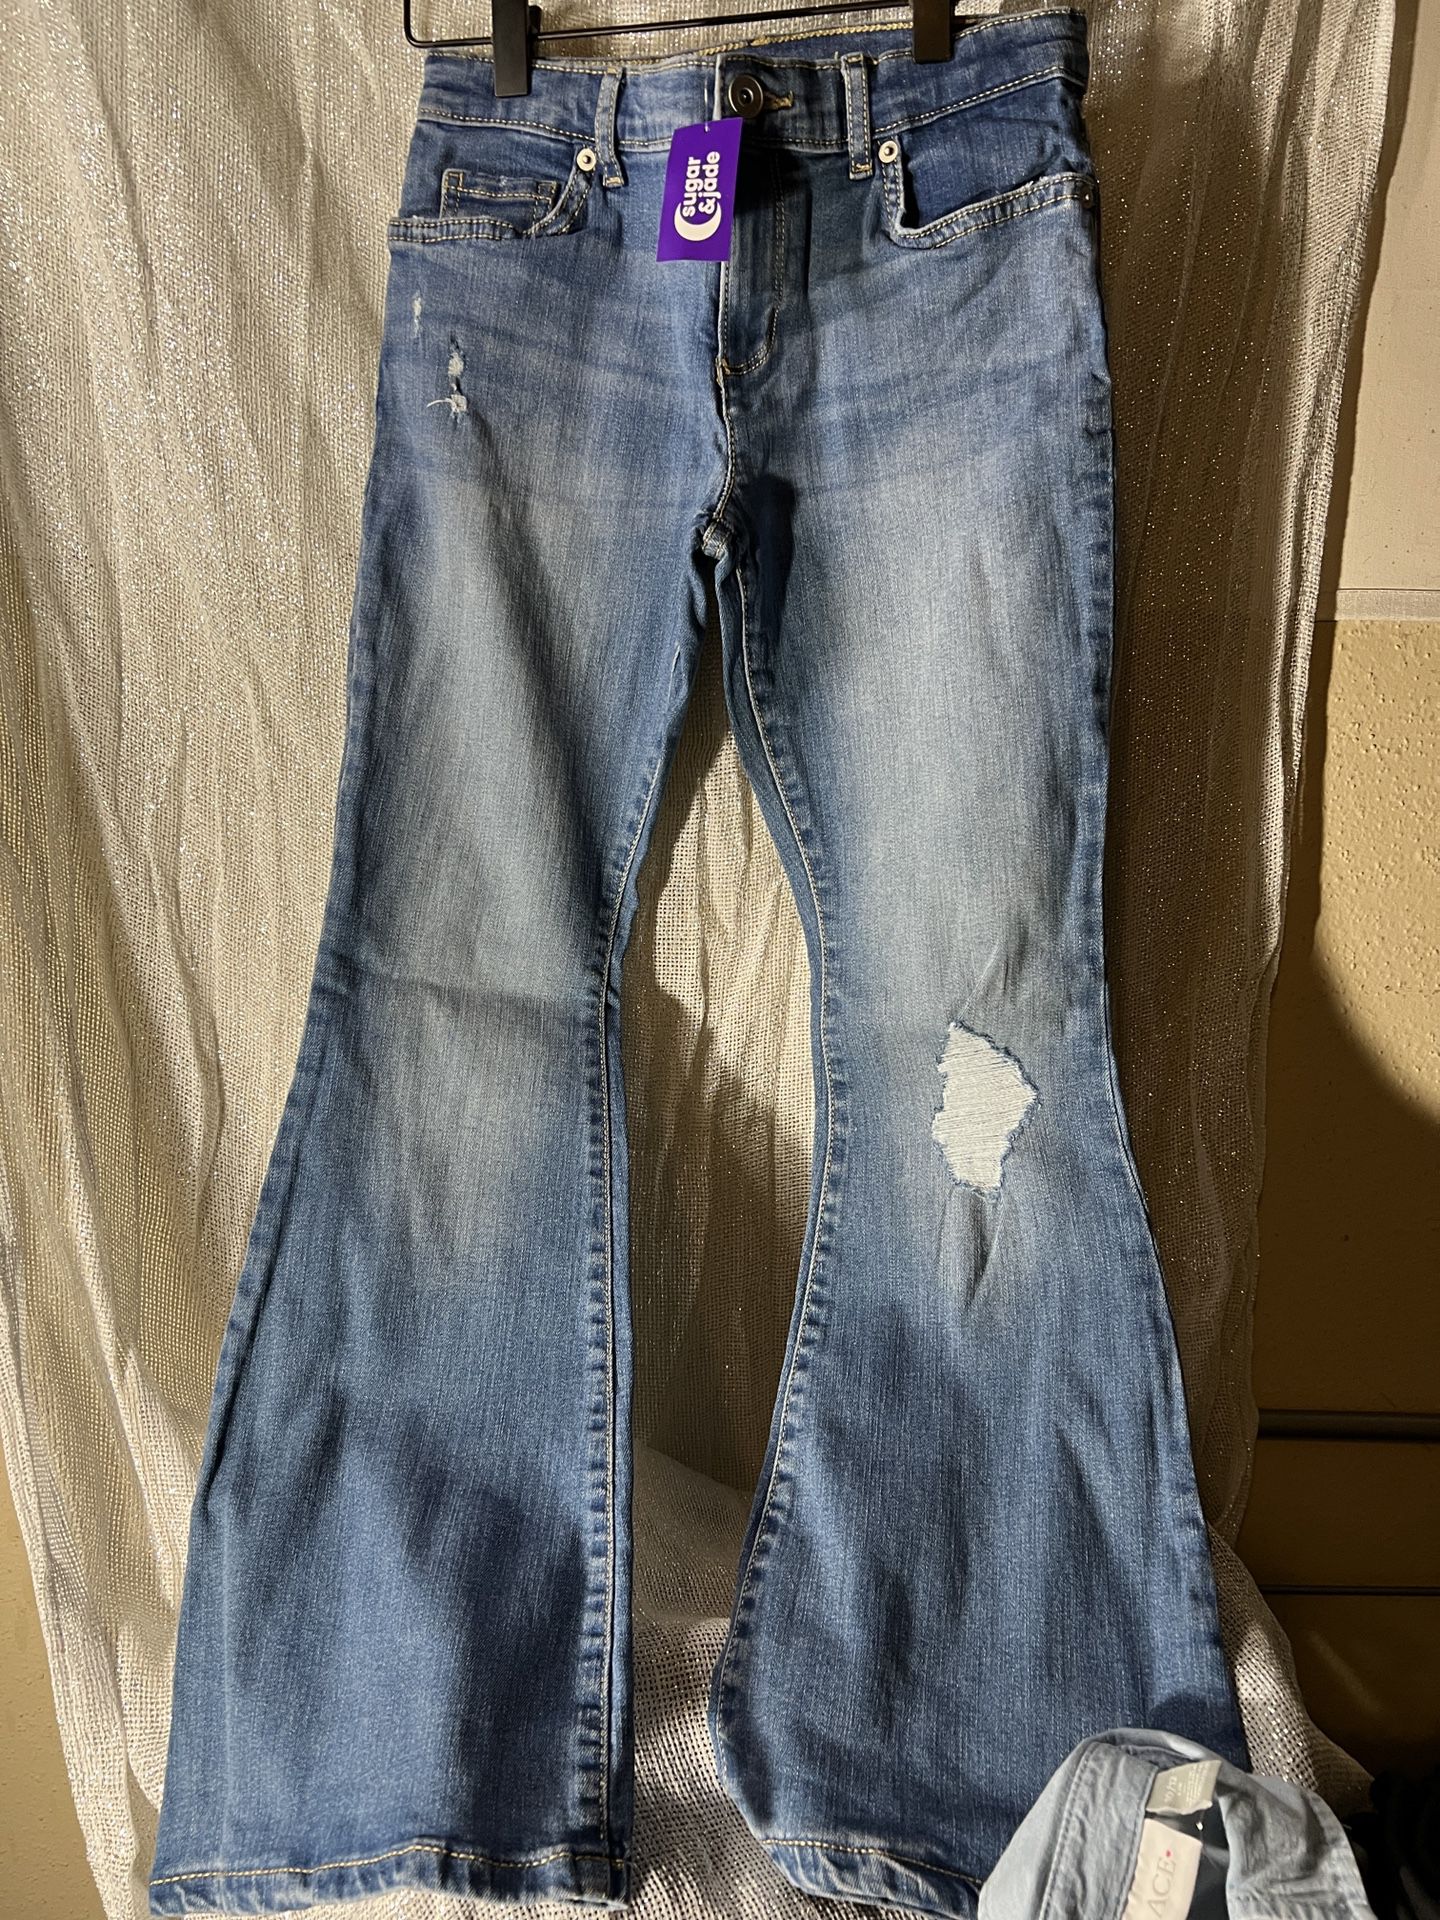 binde I tide Justering Lot Of Children's Place Girls Jeans for Sale in Fort Worth, TX - OfferUp